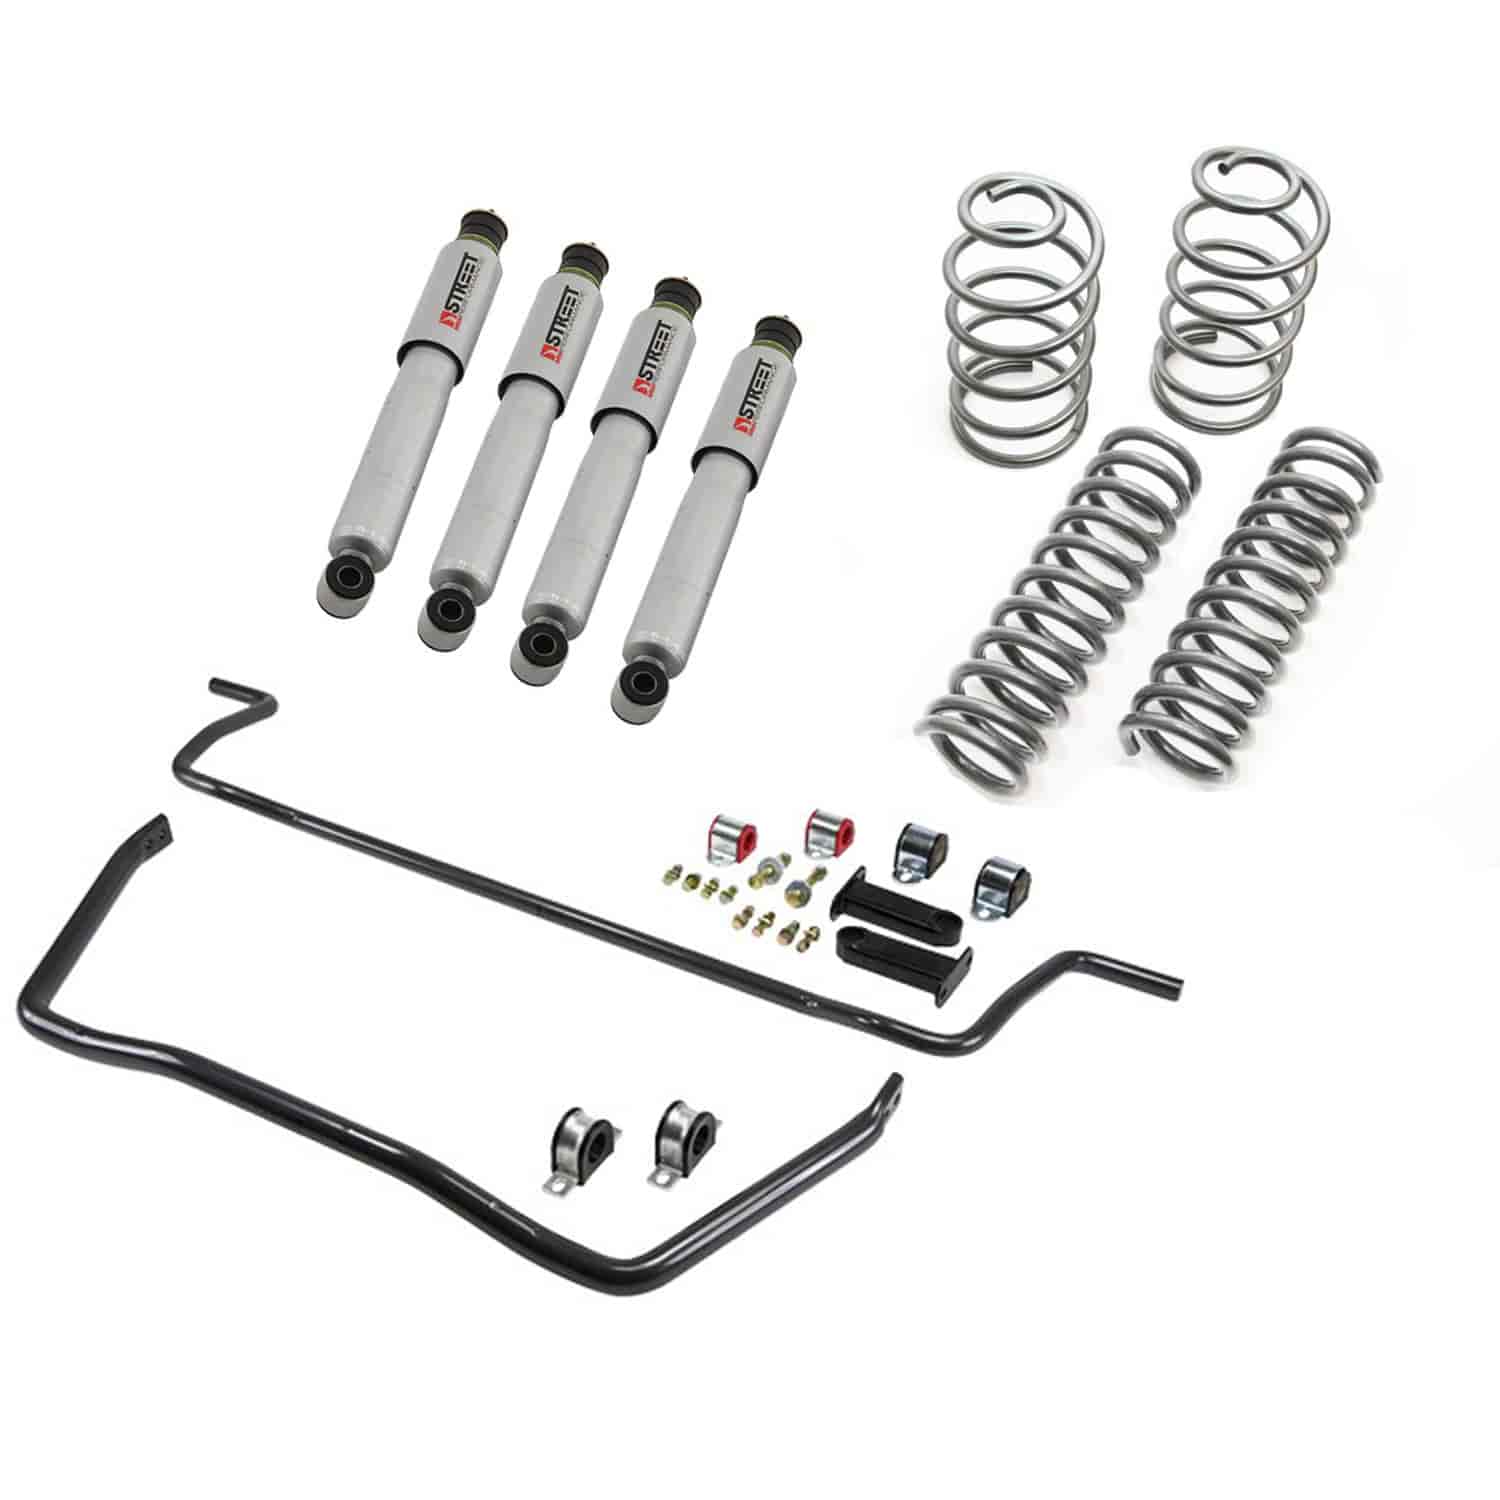 Muscle Car Suspension Kit for 2005-2014 Ford Mustang